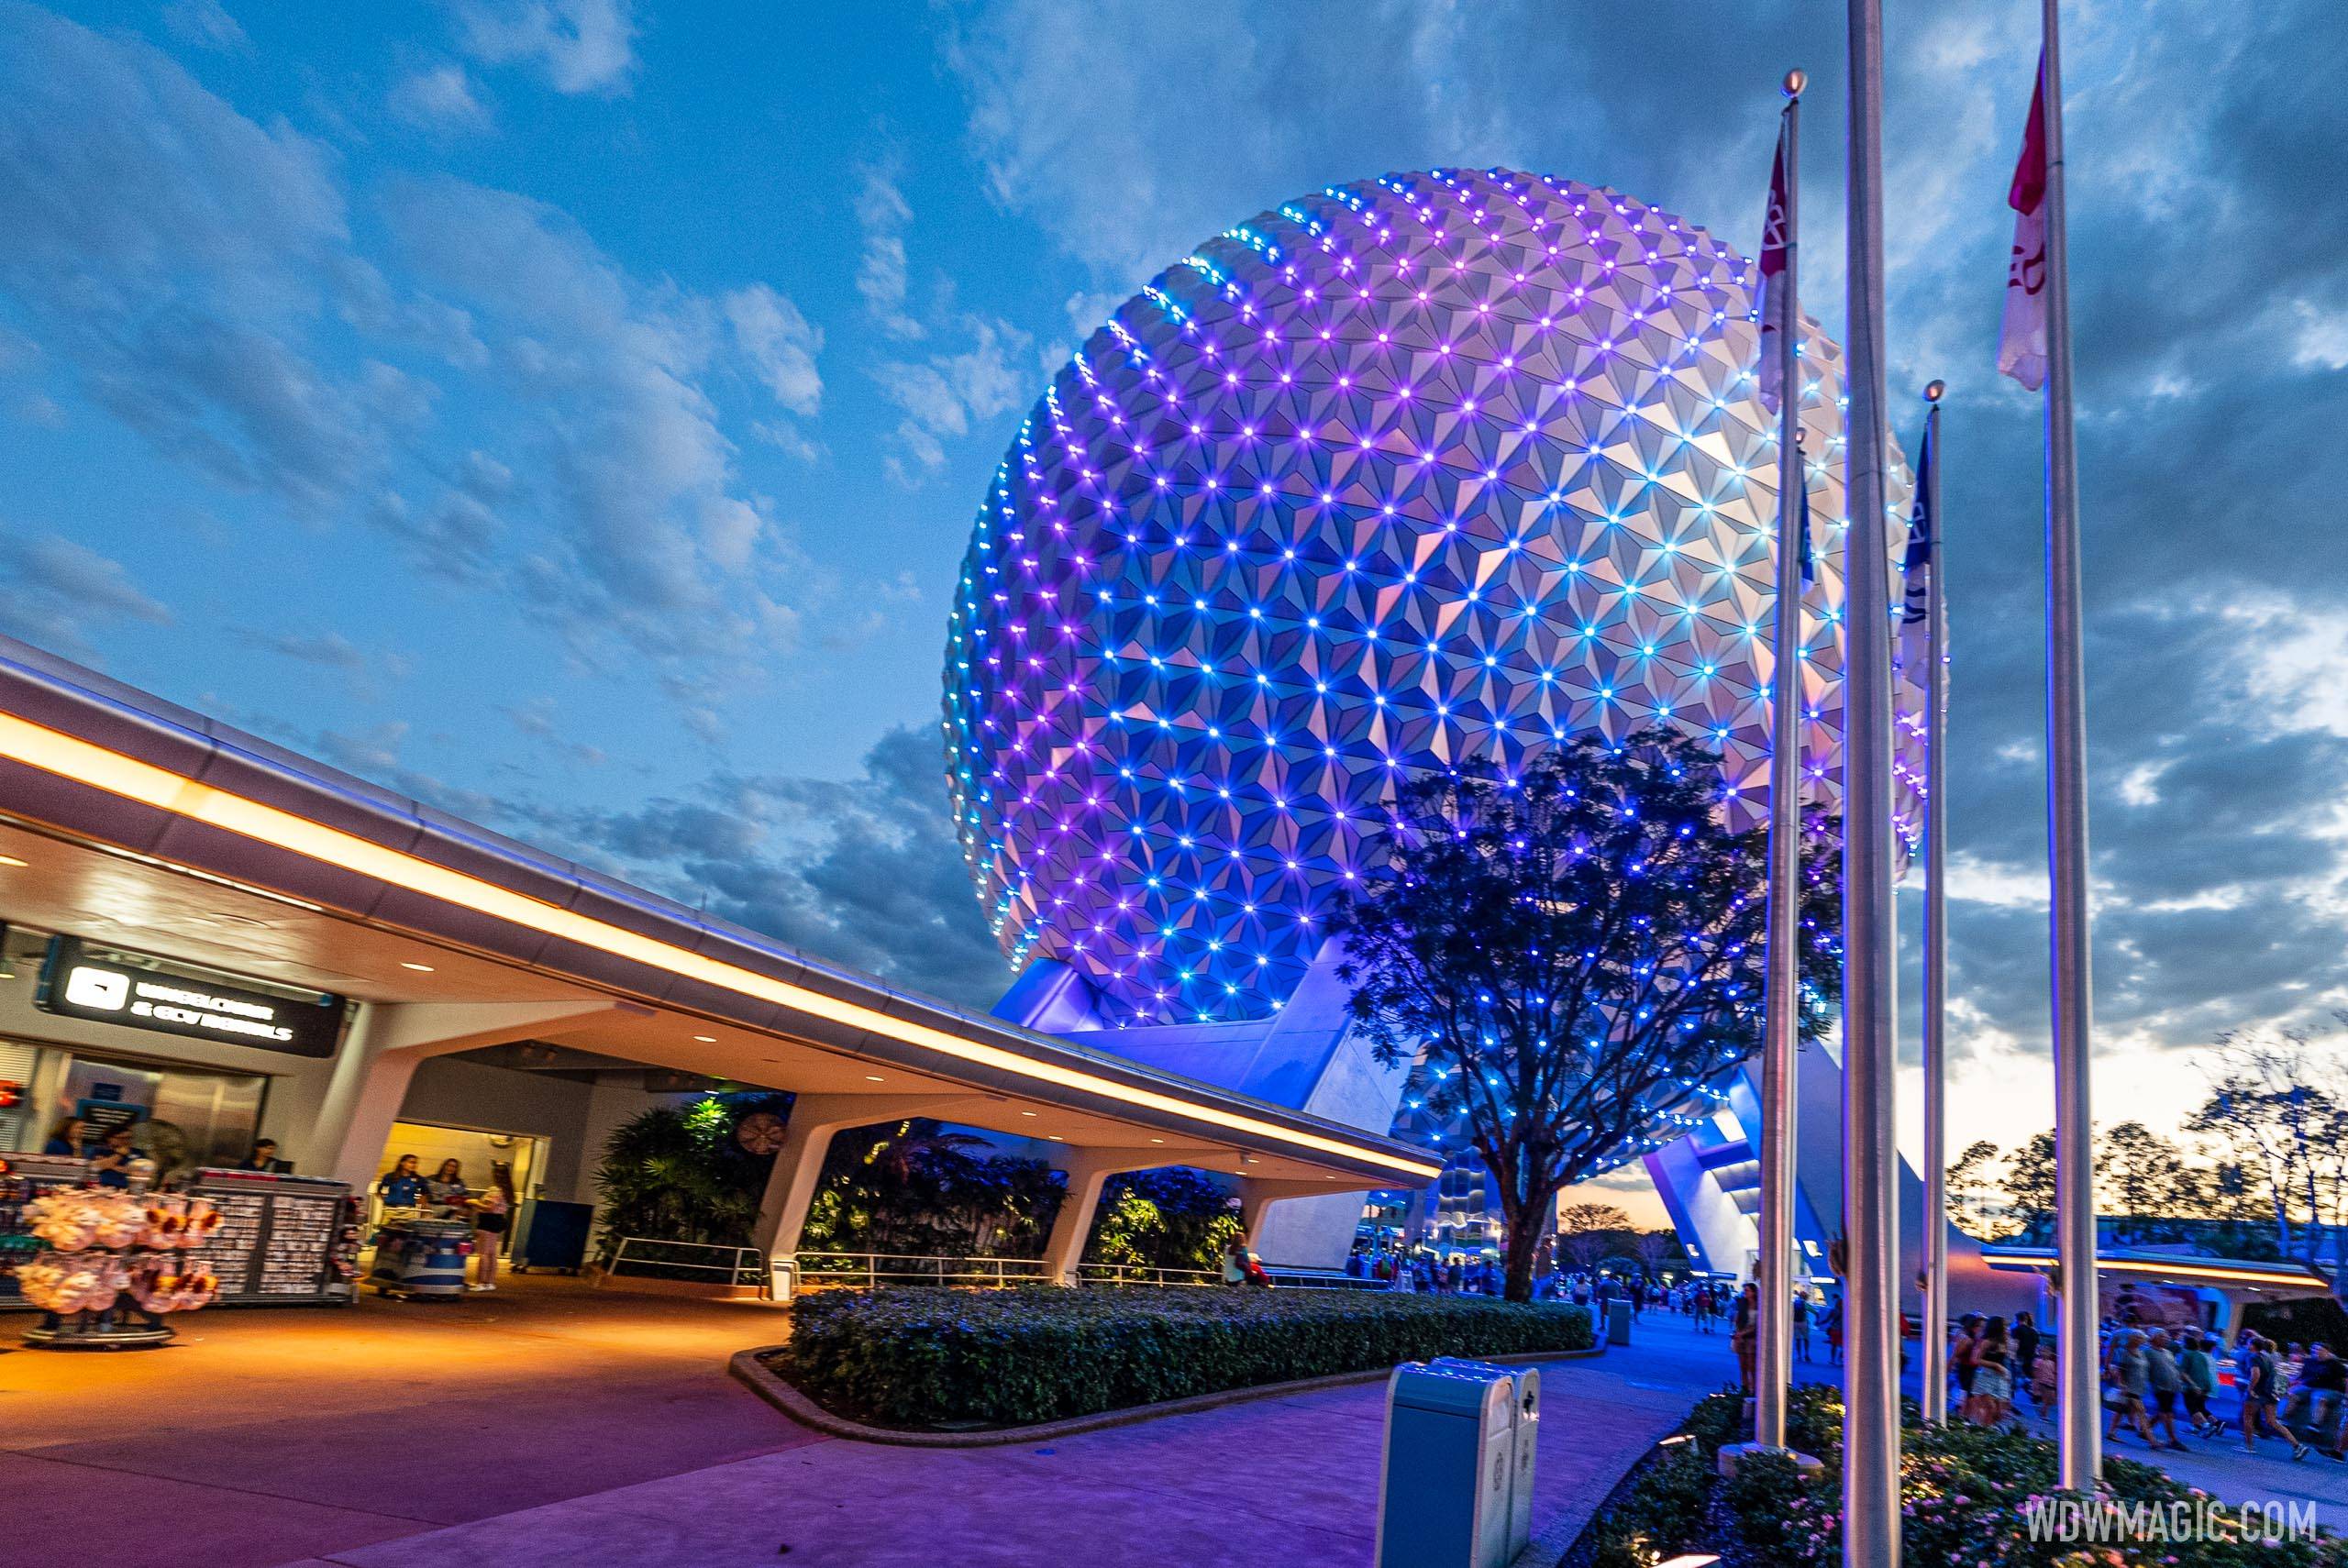 Spaceship Earth's lighting system is 100% energy efficient LED powered